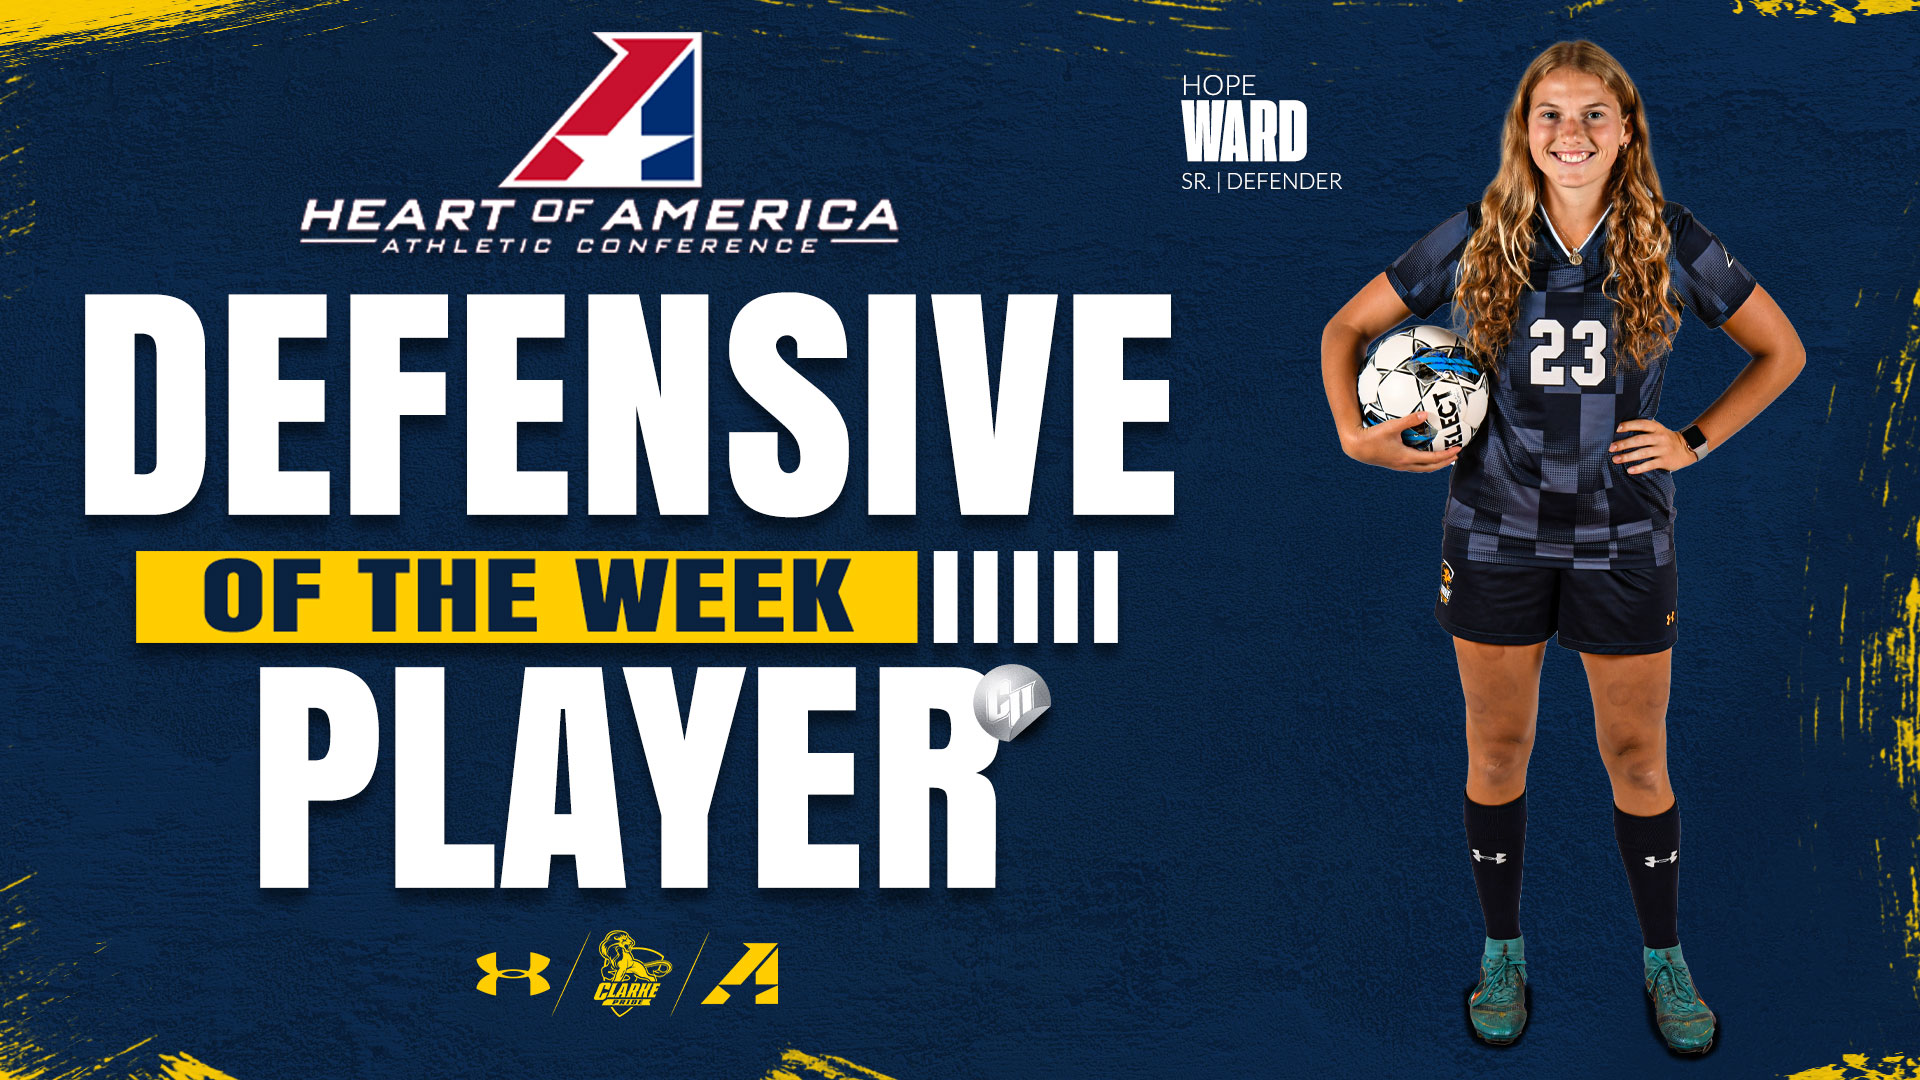 Ward secures defensive weekly honor from the Heart